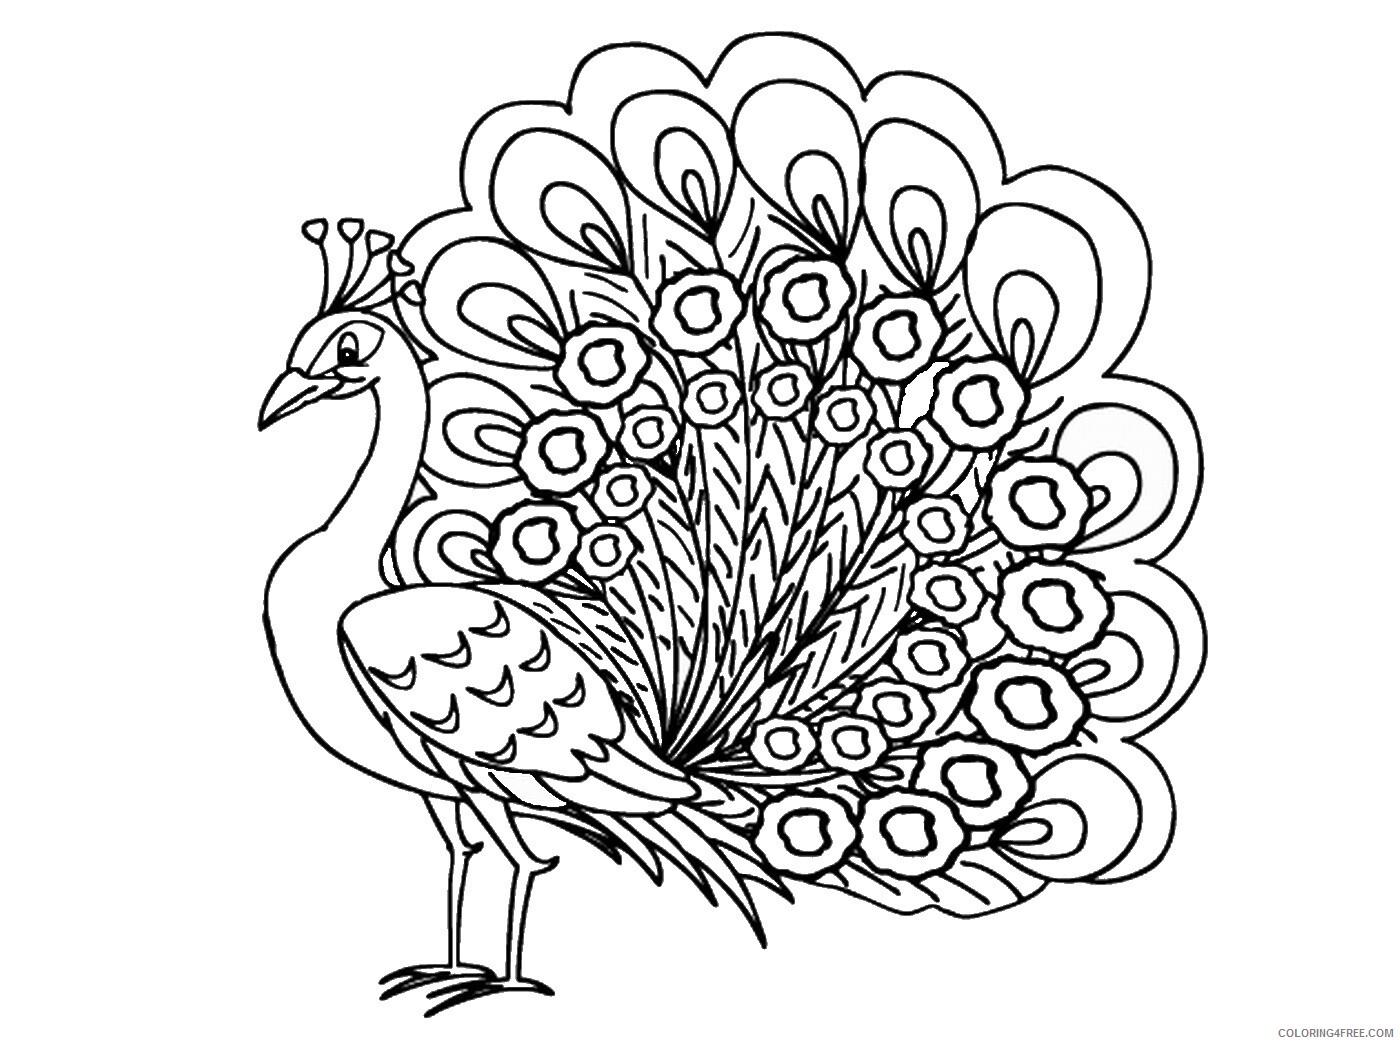 Peacock Coloring Pages Animal Printable Sheets peacock_cl_10 2021 3763 Coloring4free